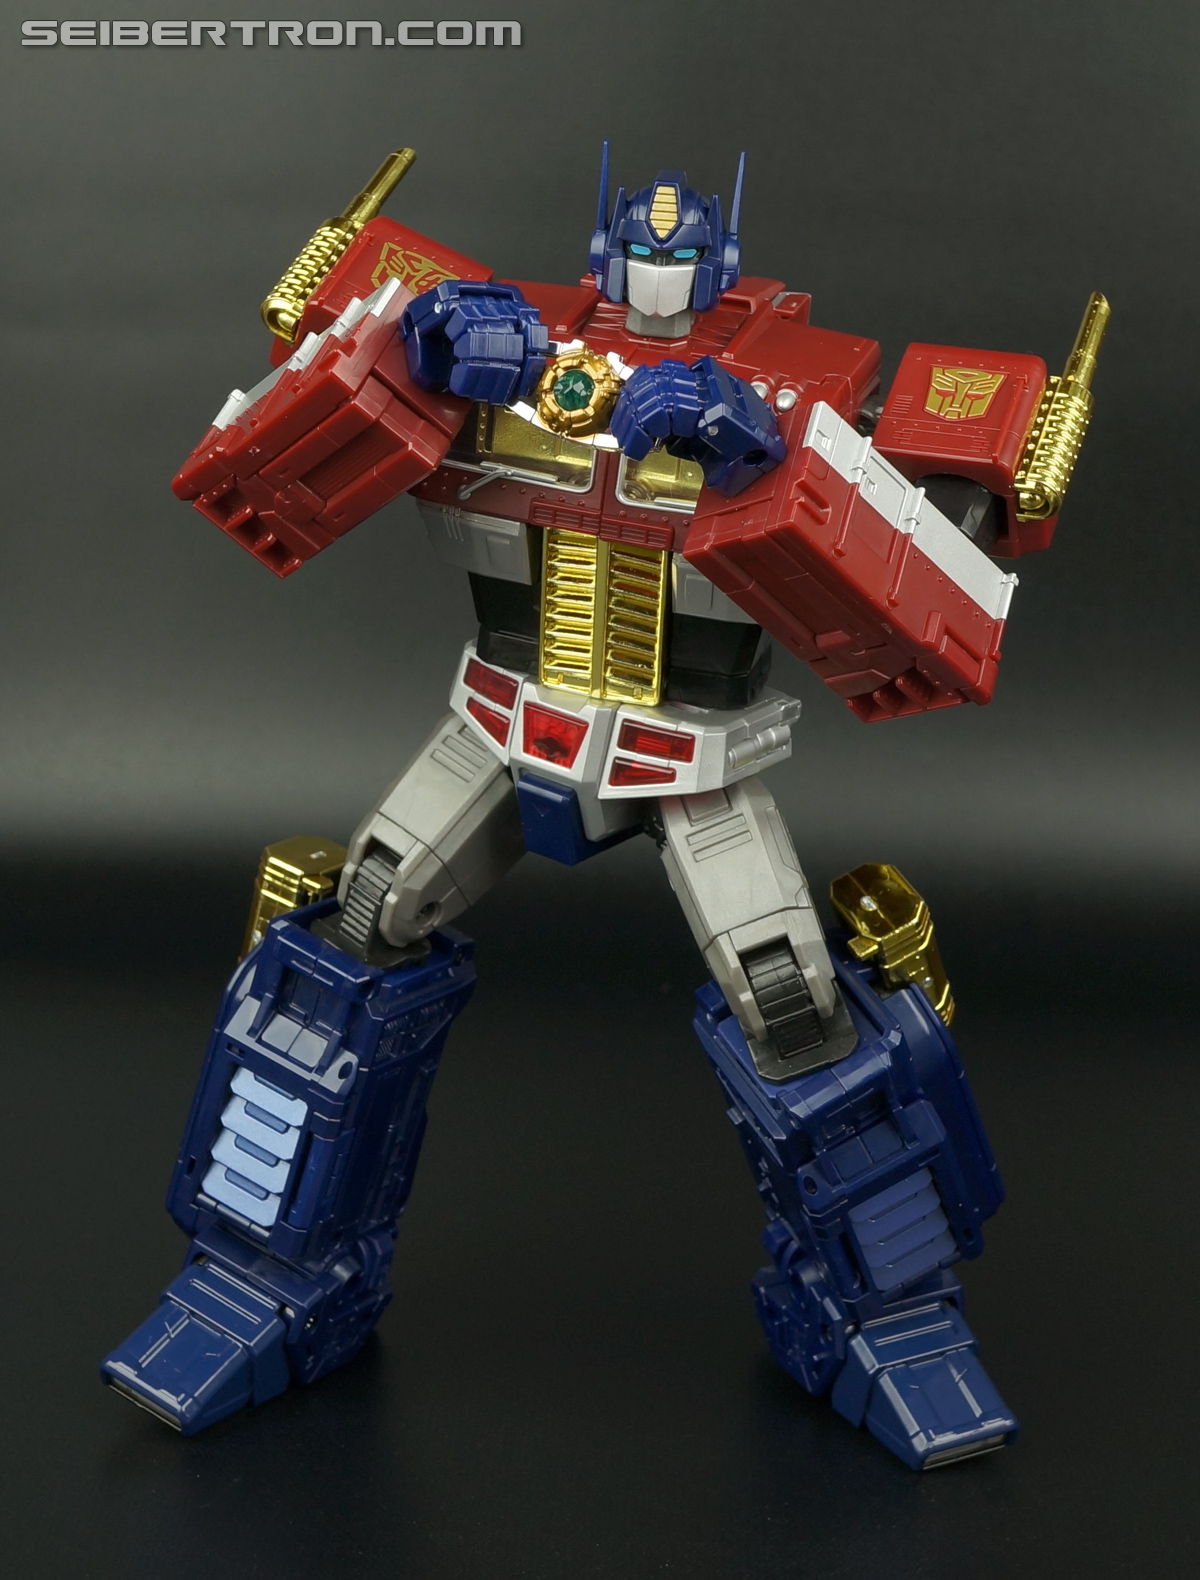 Transformers Platinum Edition Year of the Horse Optimus Prime (Image #191 of 231)